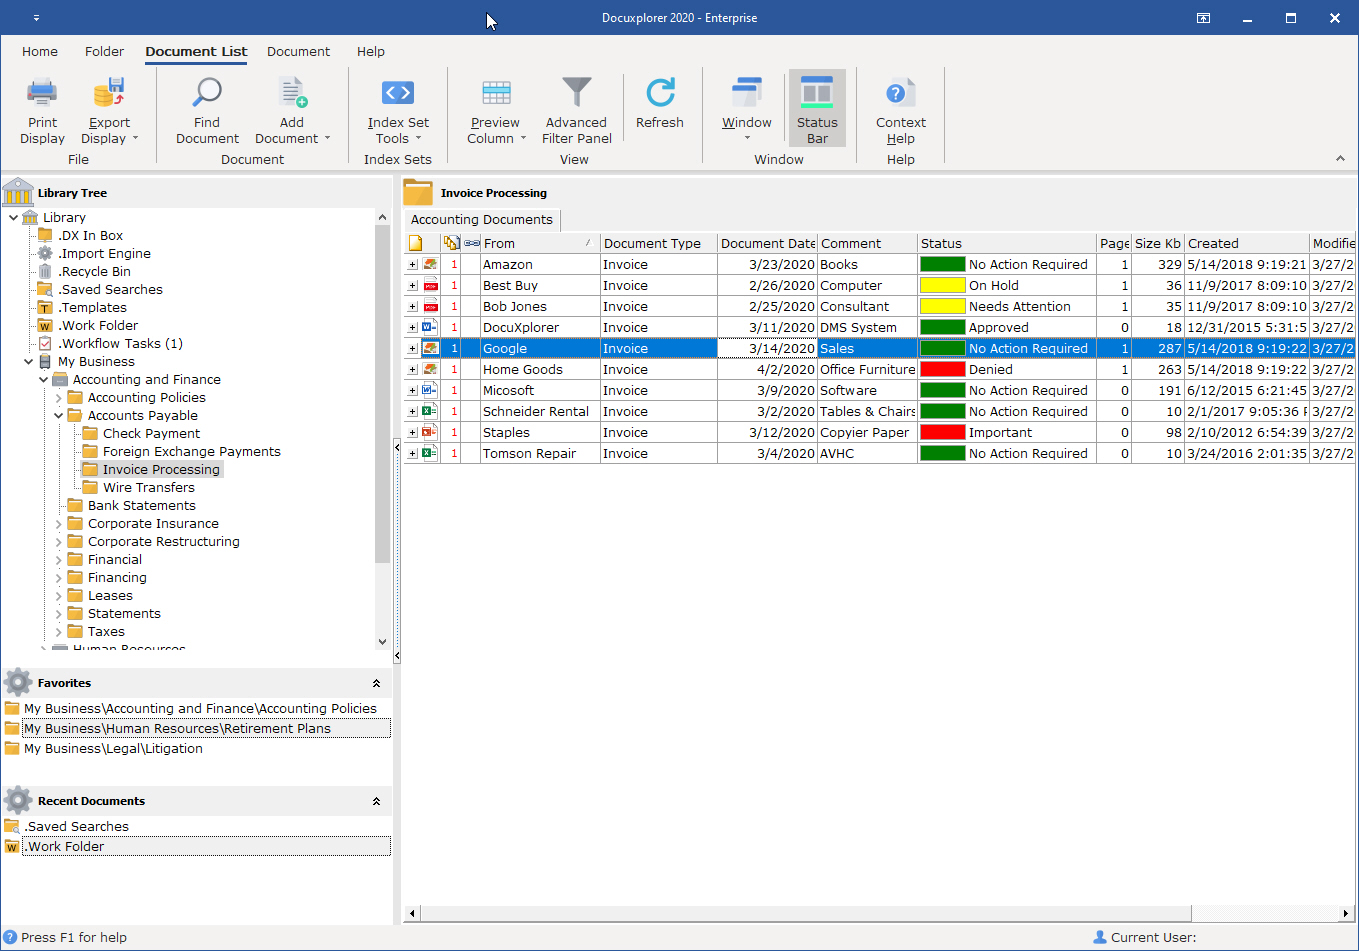 The DocuXplorer Desktop Screen allows you to easily find and mange documents